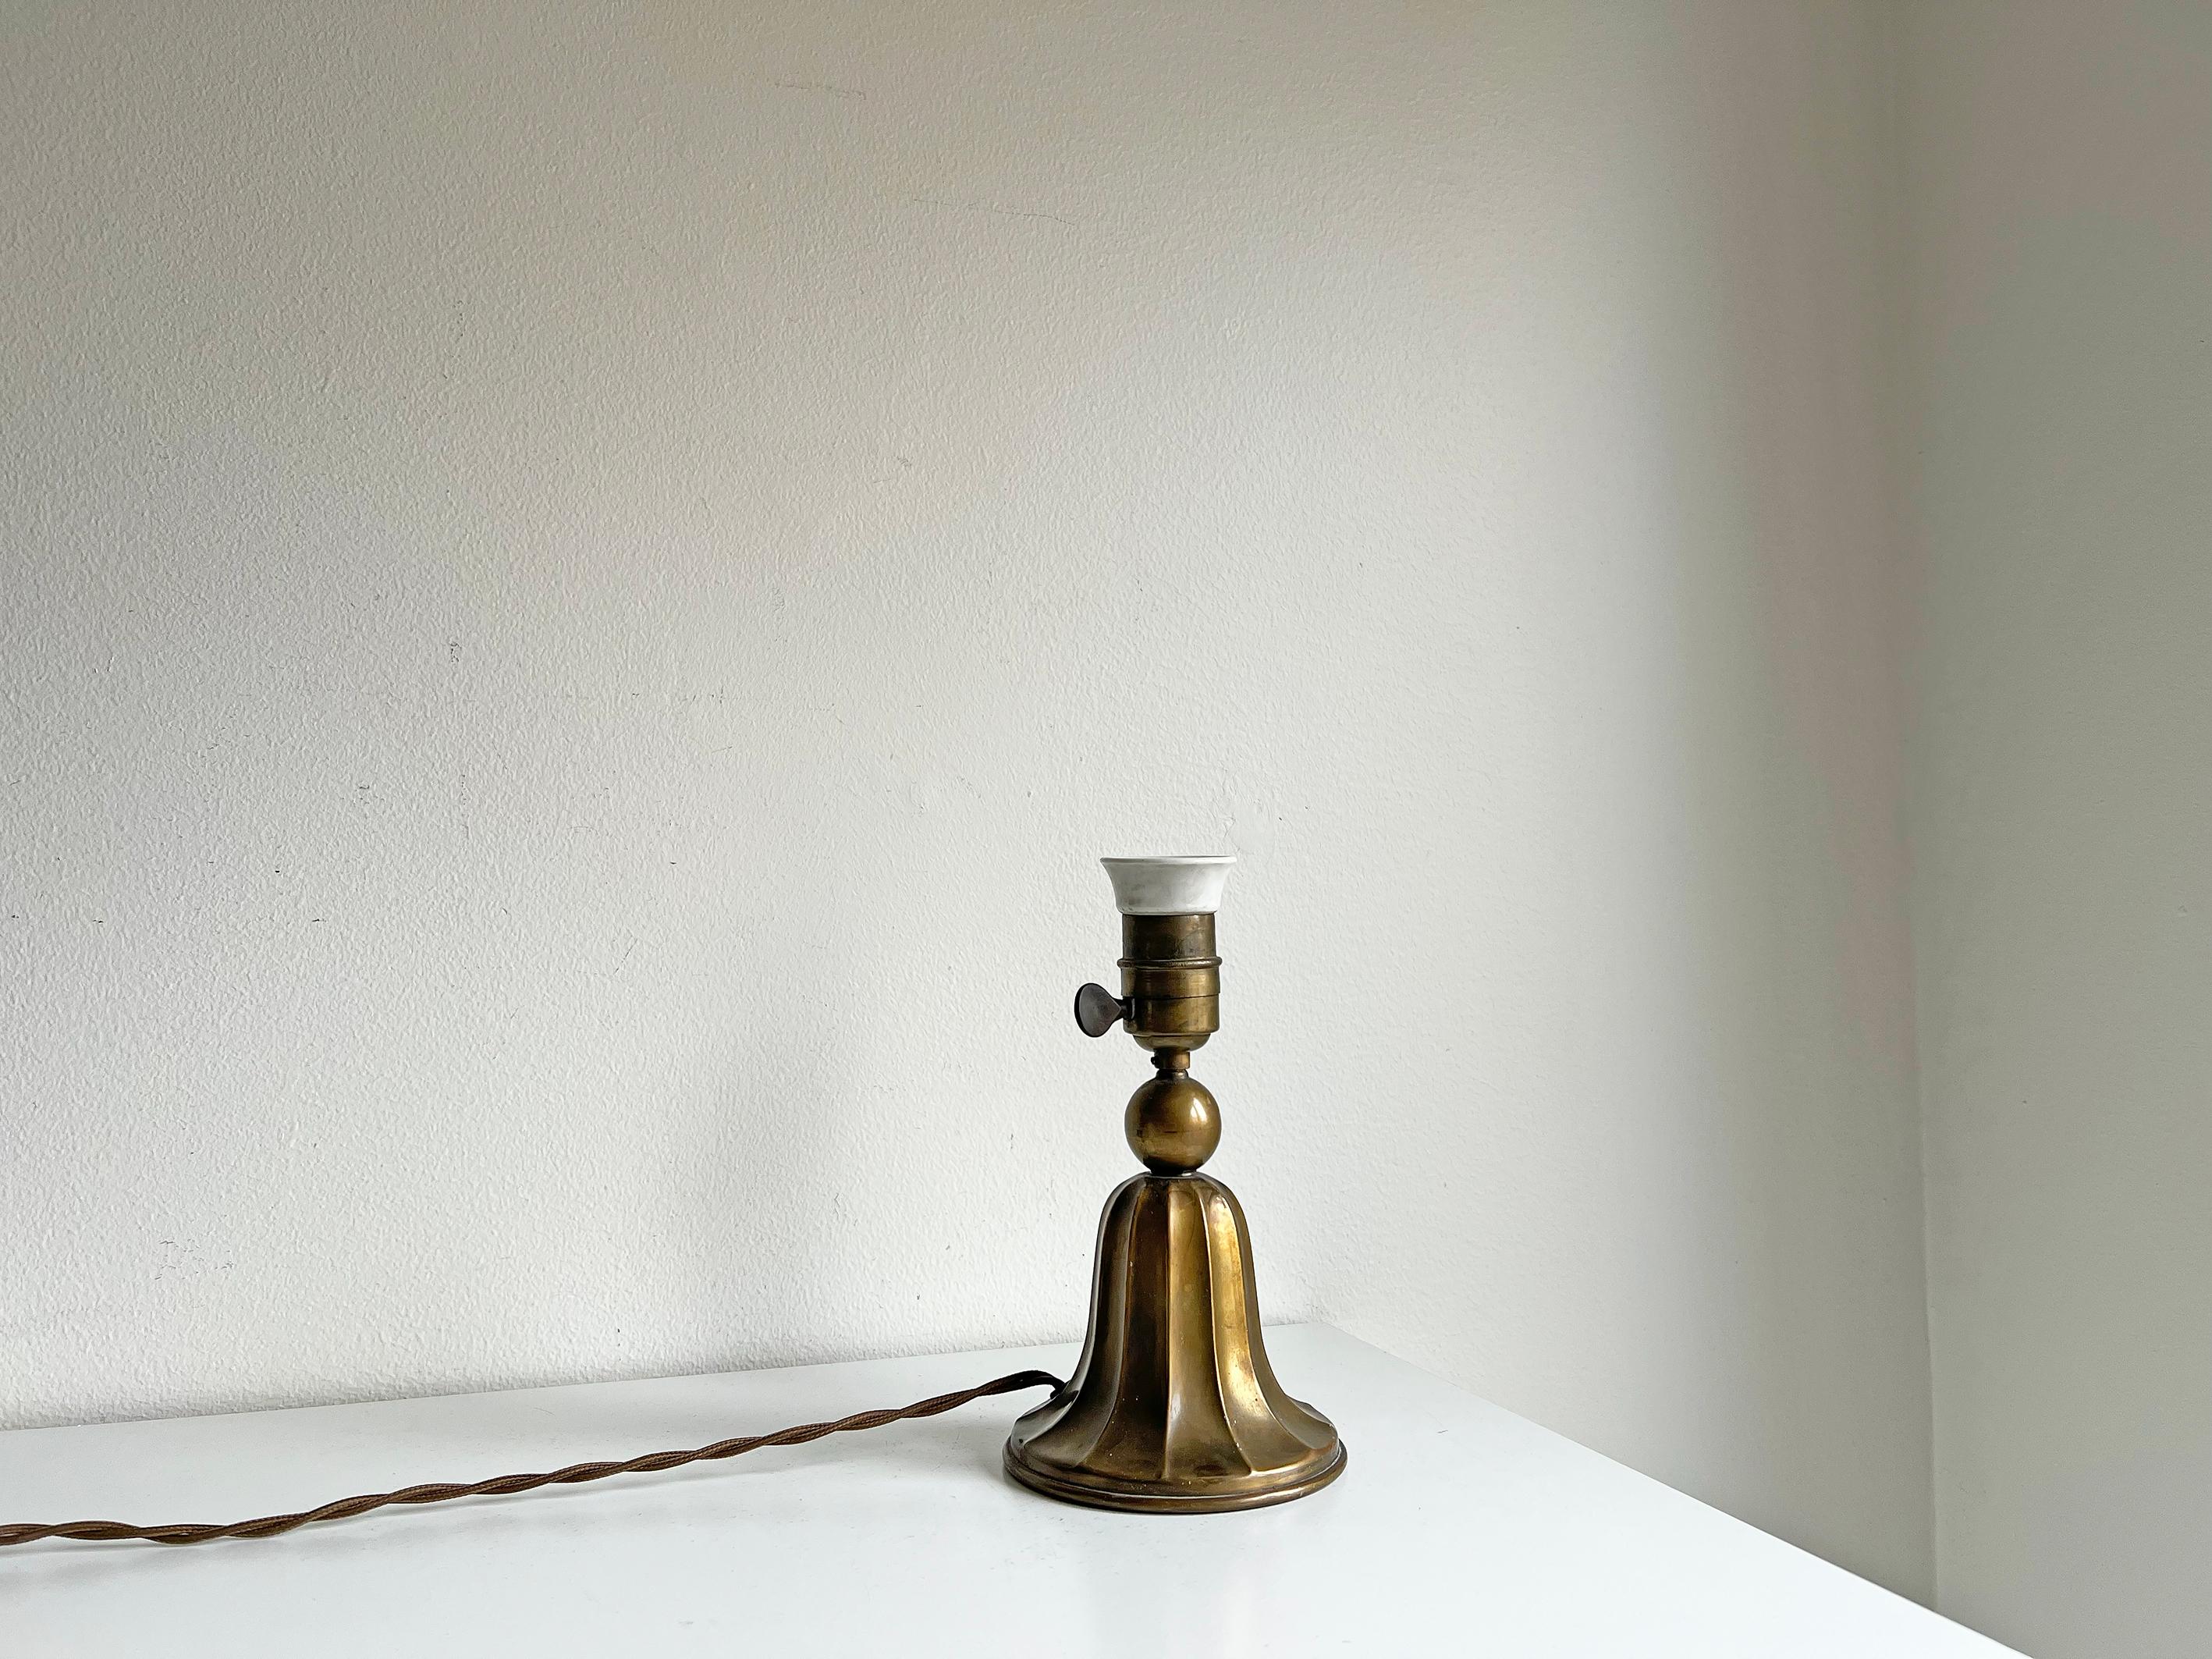 Swedish Art Deco Table Lamp in Brass by CG Hallberg, 1920-1930s For Sale